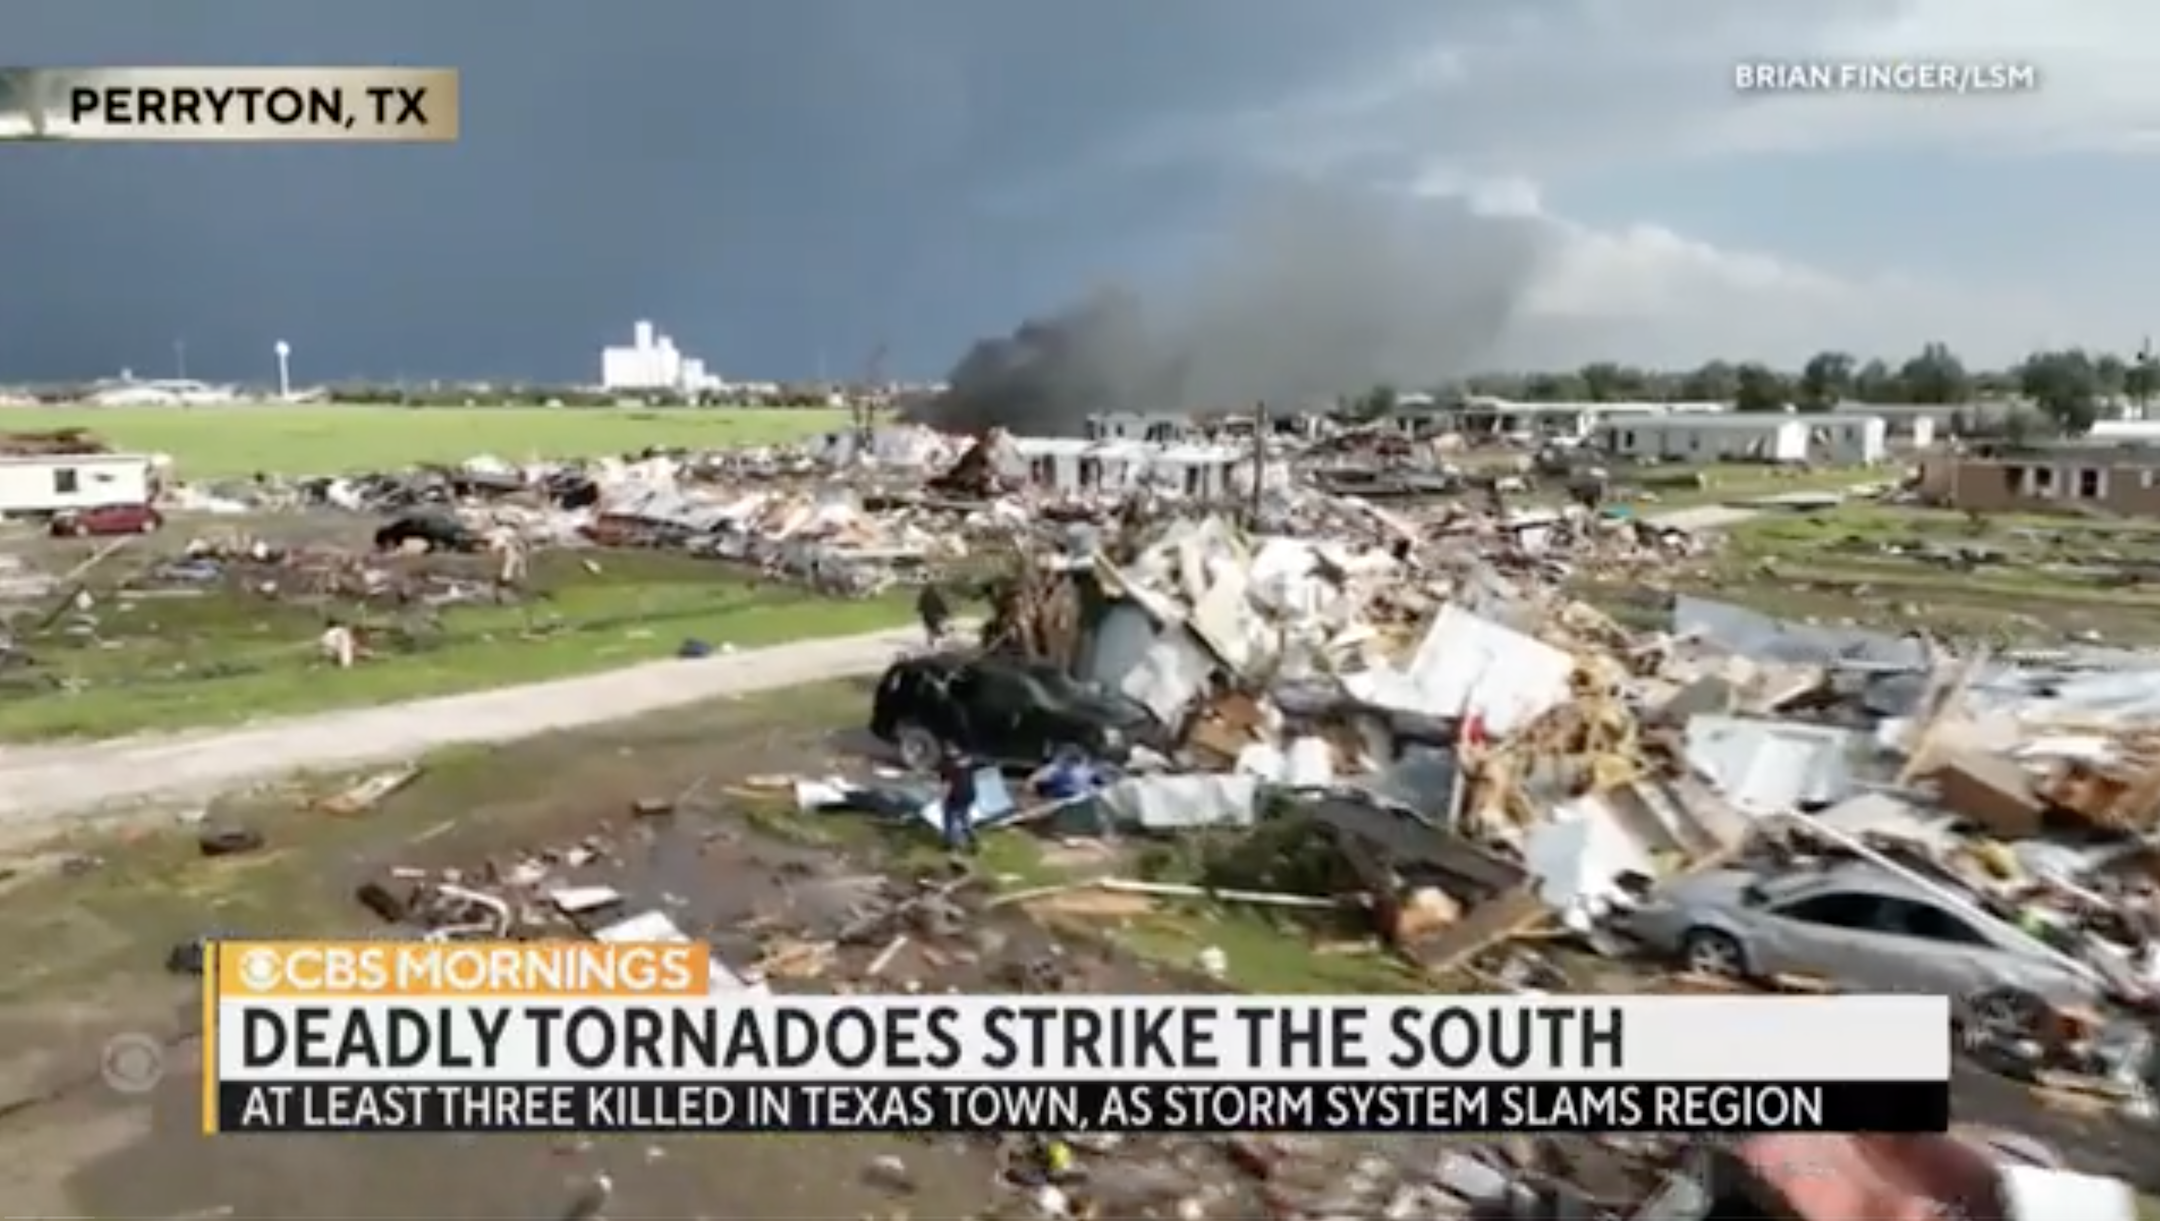 Scene of destruction in Perryton, with CBS Mornings chyron &quot;Deadly tornadoes strike the South; at least three killed in Texas town as storm system slams region&quot;